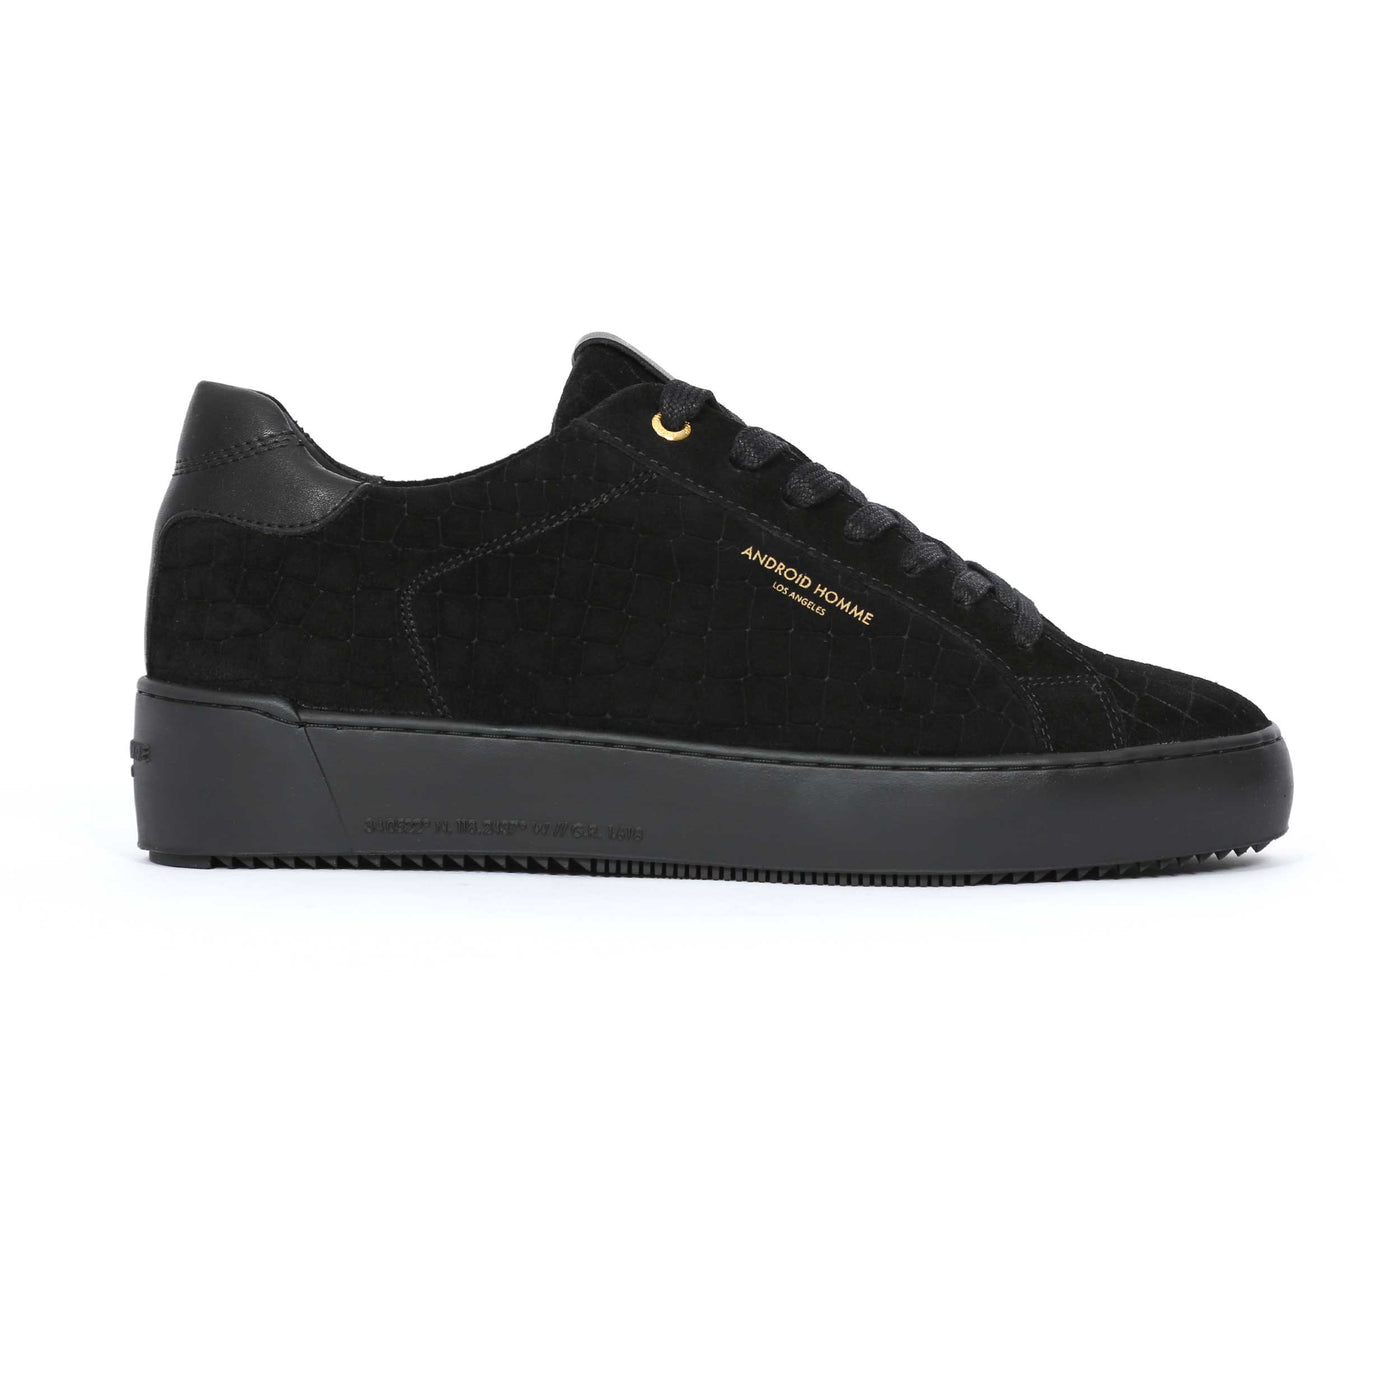 Android Homme Zuma Trainer in Caiman Croc Black